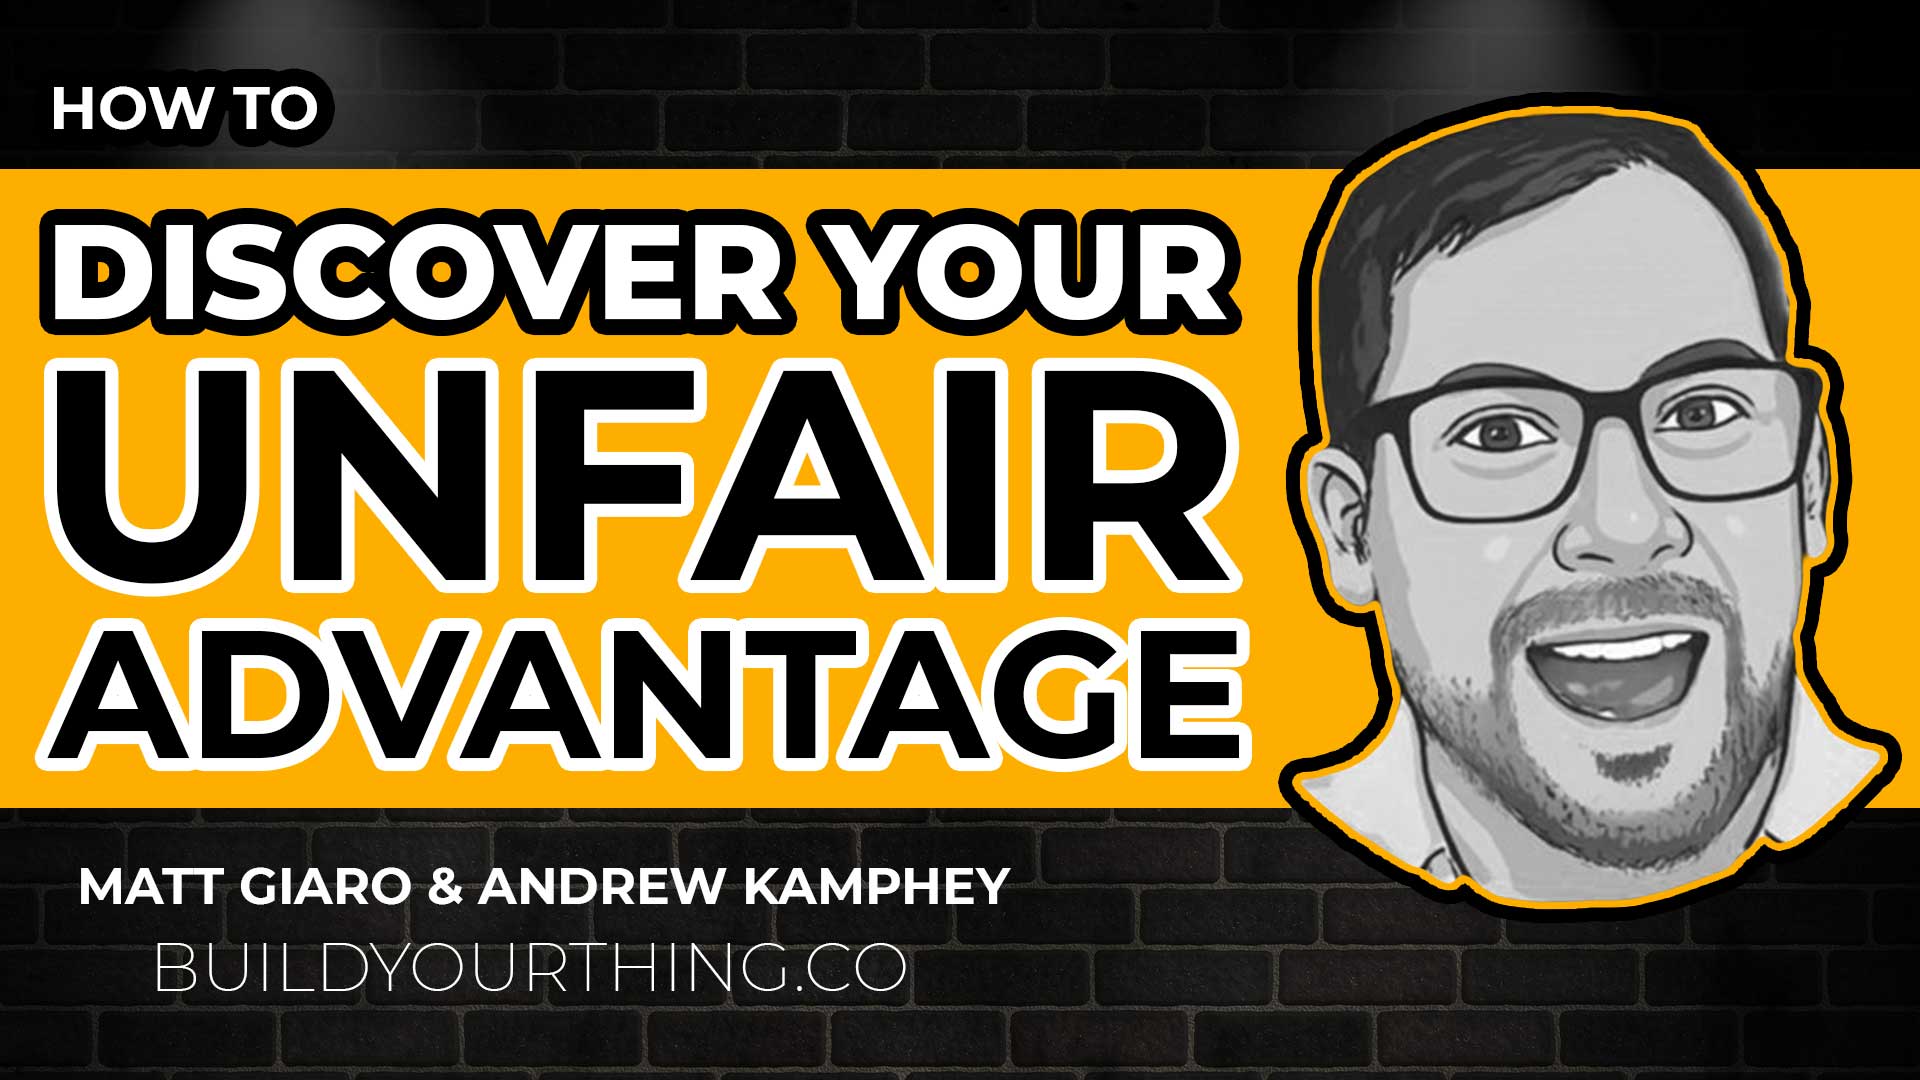 How to Find Your Unfair Advantage With Andrew Kamphey